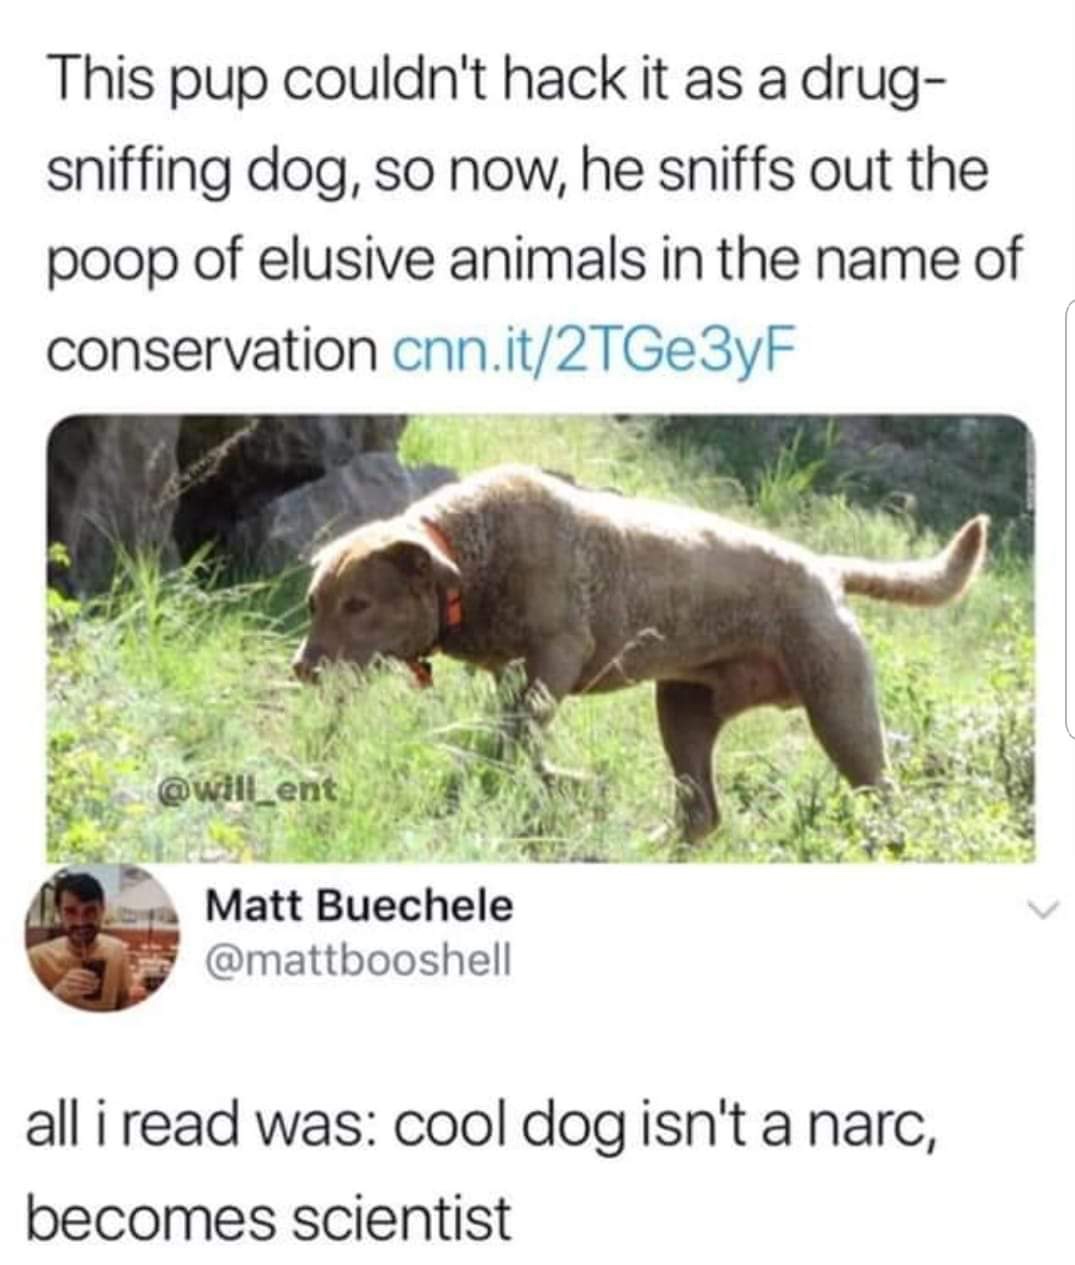 cool dog isn t narc becomes scientist - This pup couldn't hack it as a drug sniffing dog, so now, he sniffs out the poop of elusive animals in the name of conservation cnn.it2TGe3yF Matt Buechele all i read was cool dog isn't a narc, becomes scientist